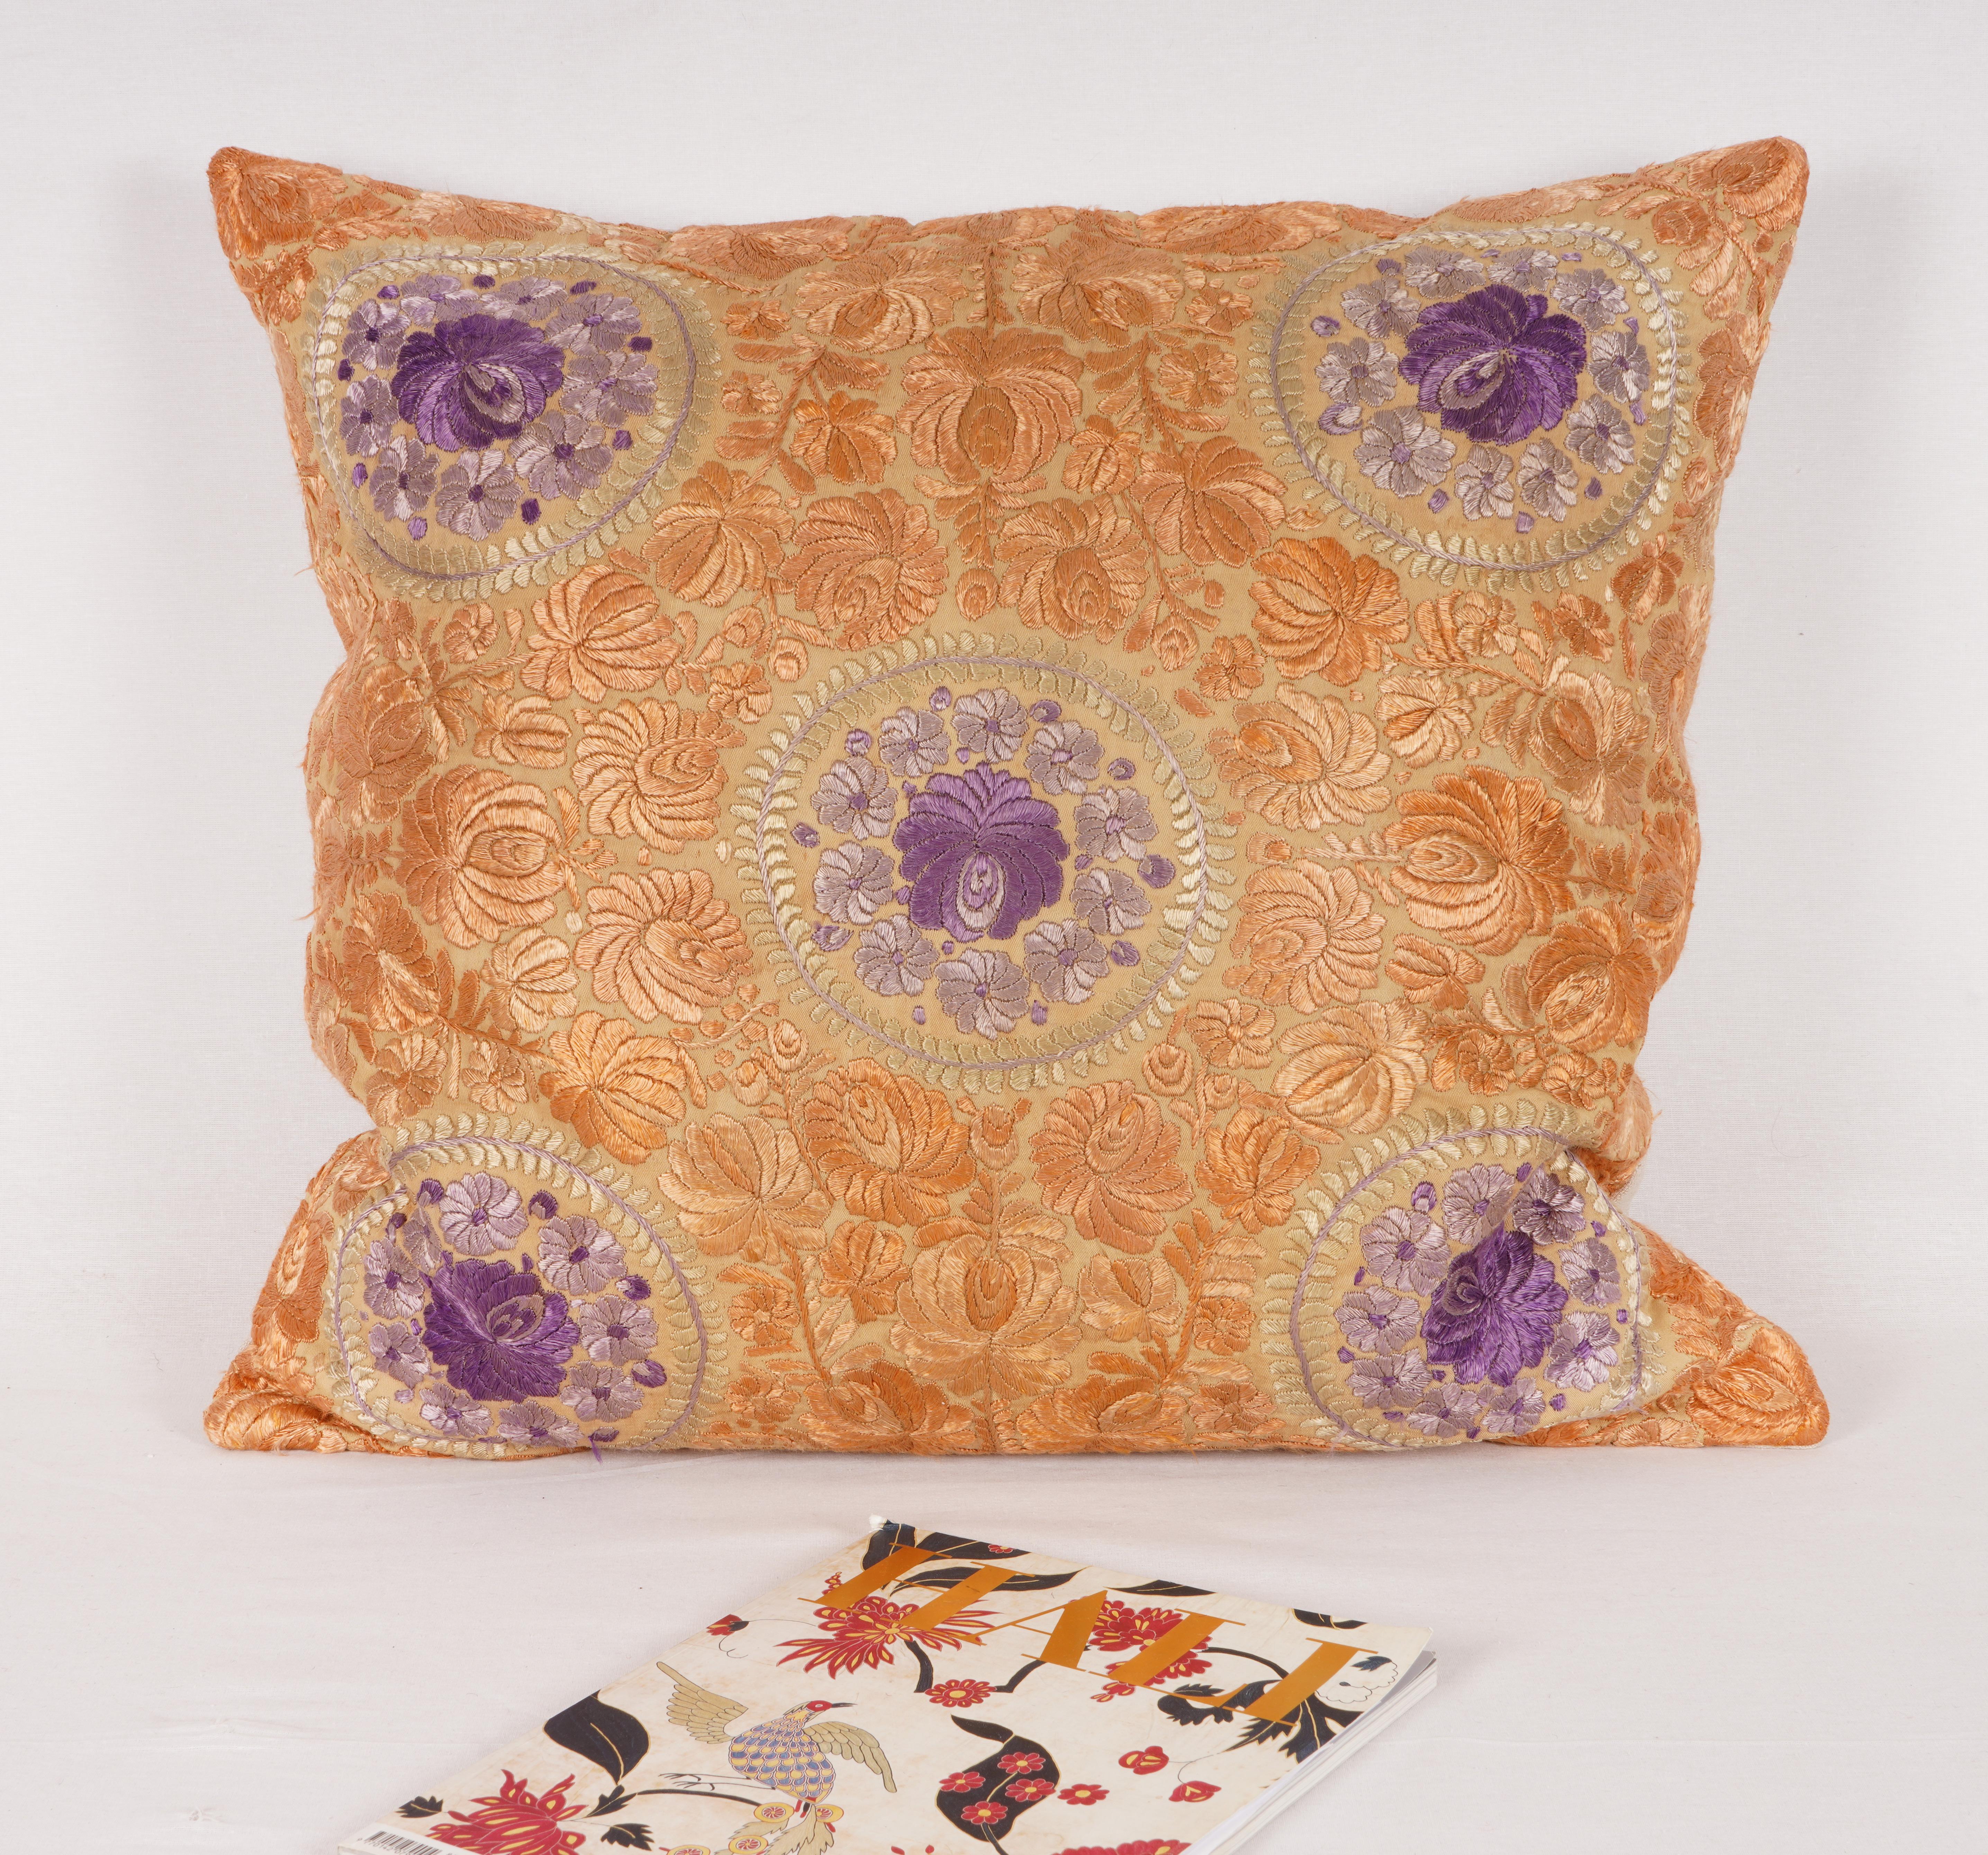 Folk Art Pillowcase Made from a Matyo Embroidery, Hungary, Early 20th C. For Sale